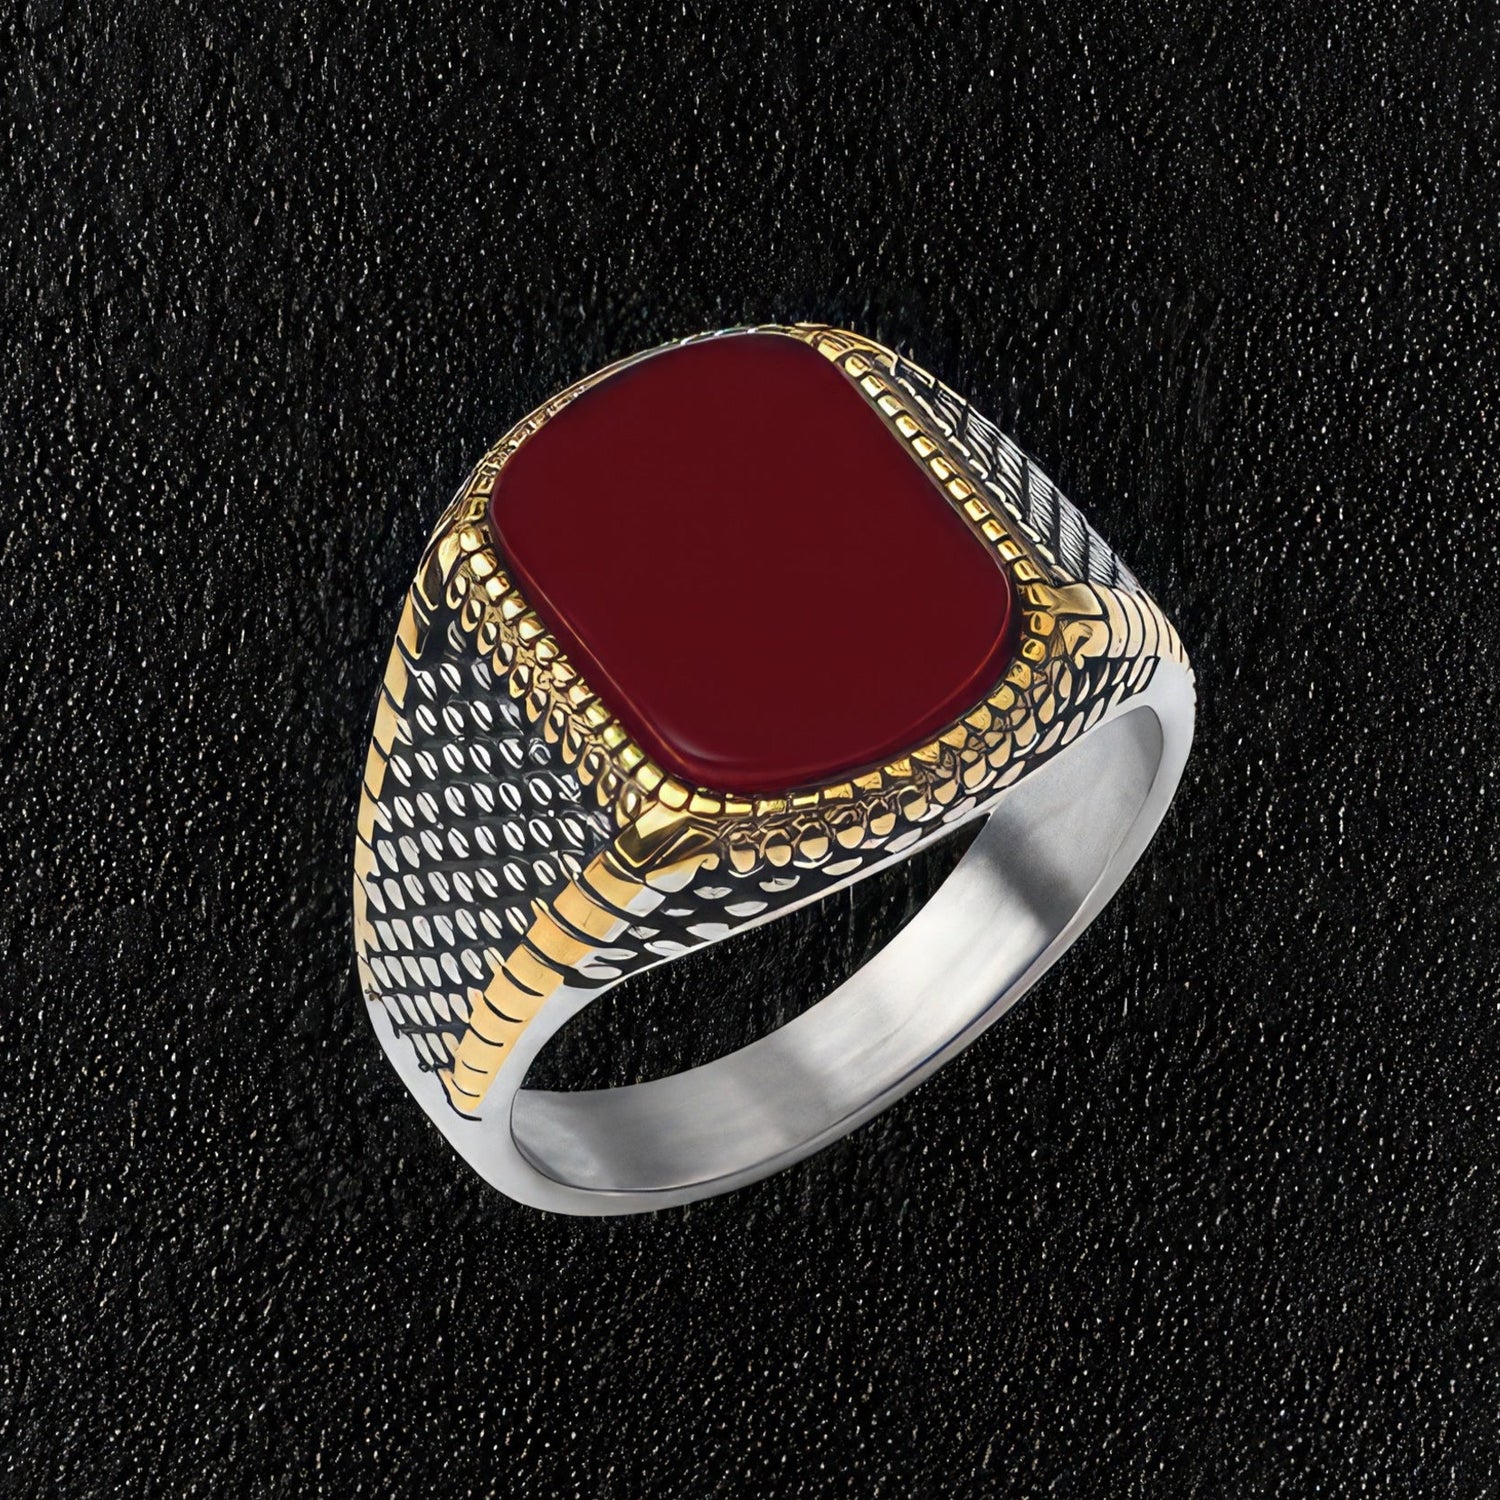 Ottoman Empire Red Onyx Ring